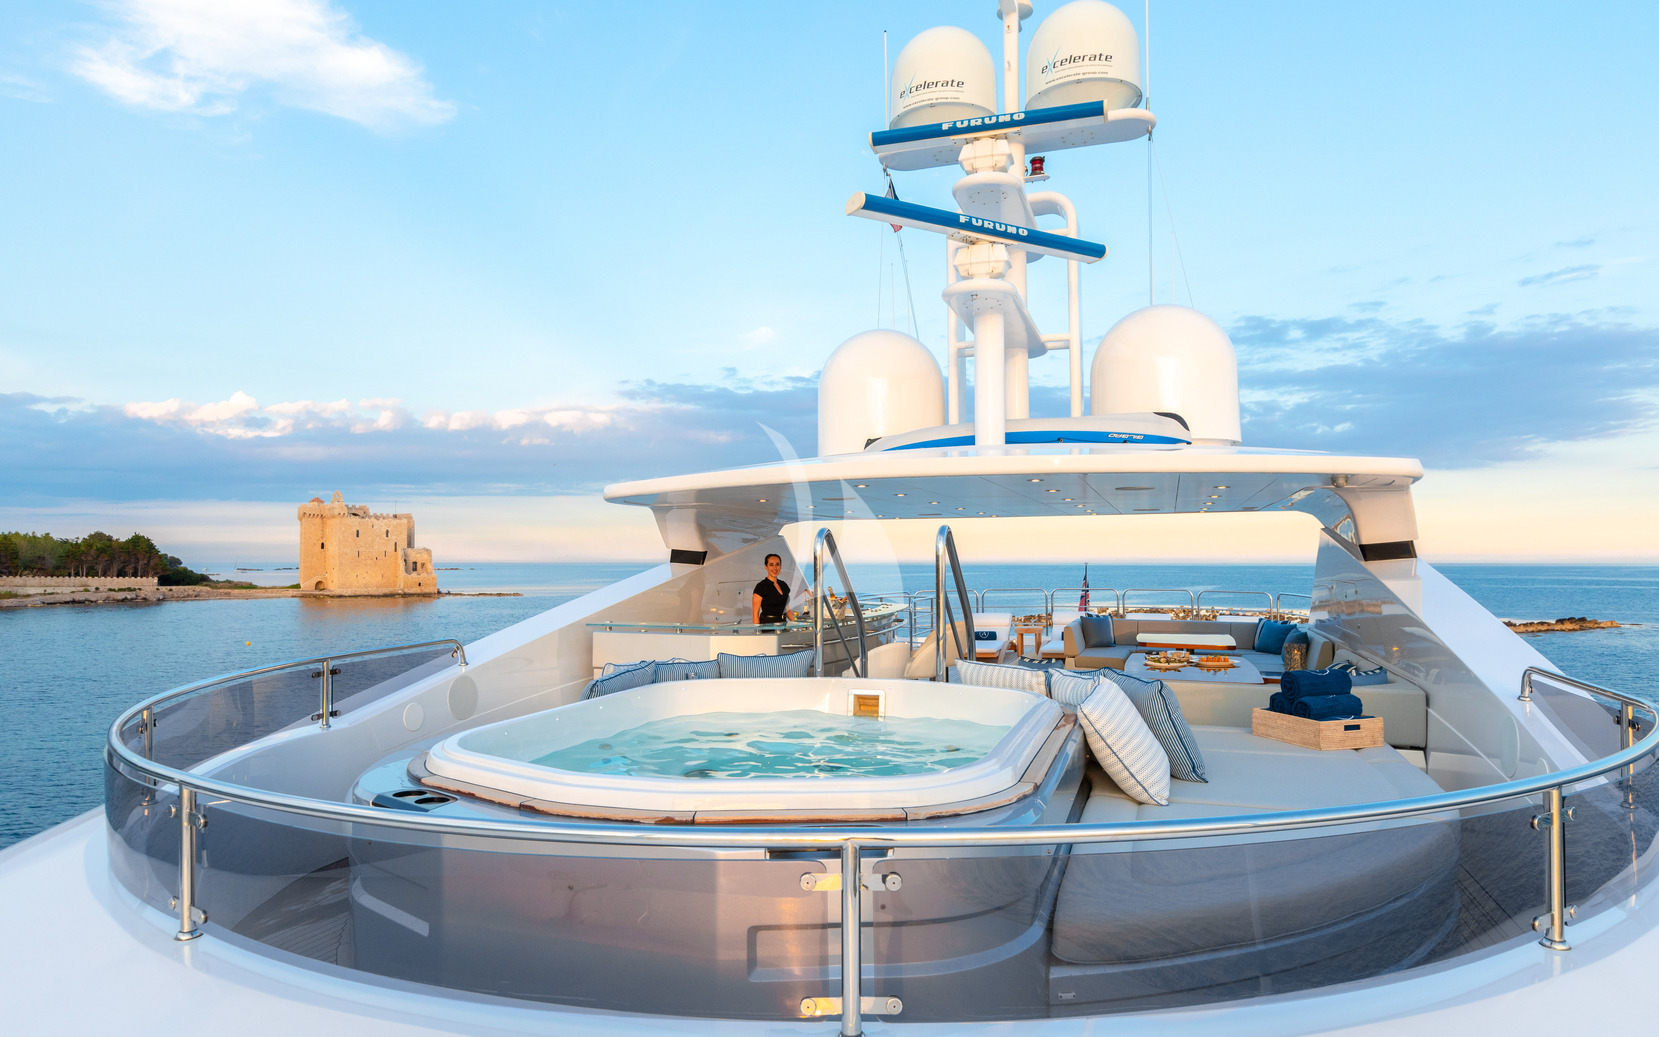 Spacious sun deck with Jacuzzi